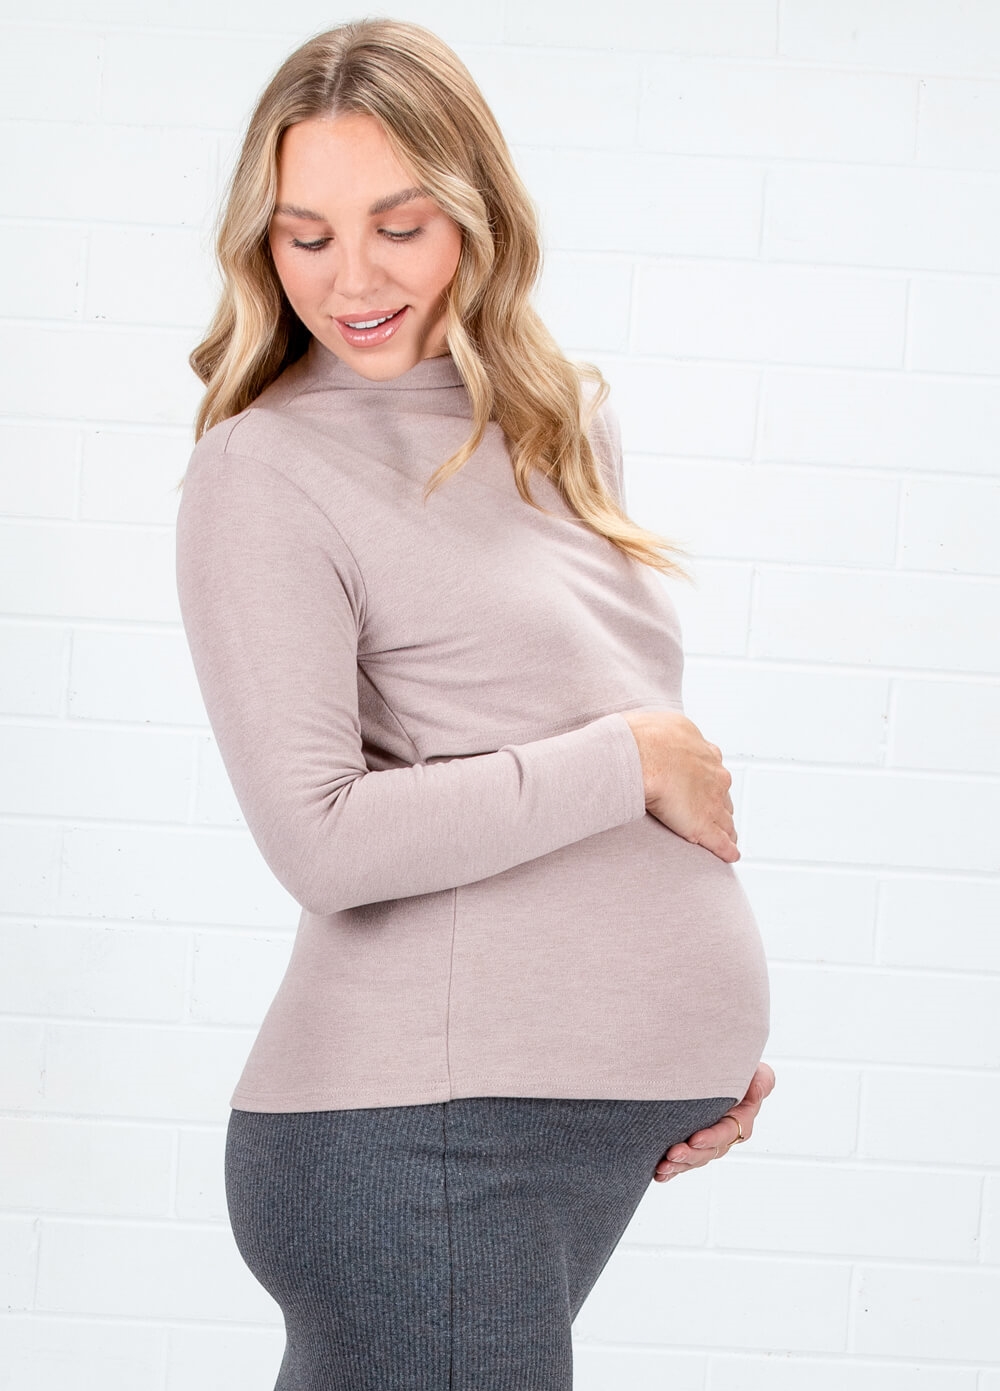 Lait & Co - Aline Cosy Maternity Feeding Top in Blush | Queen Bee